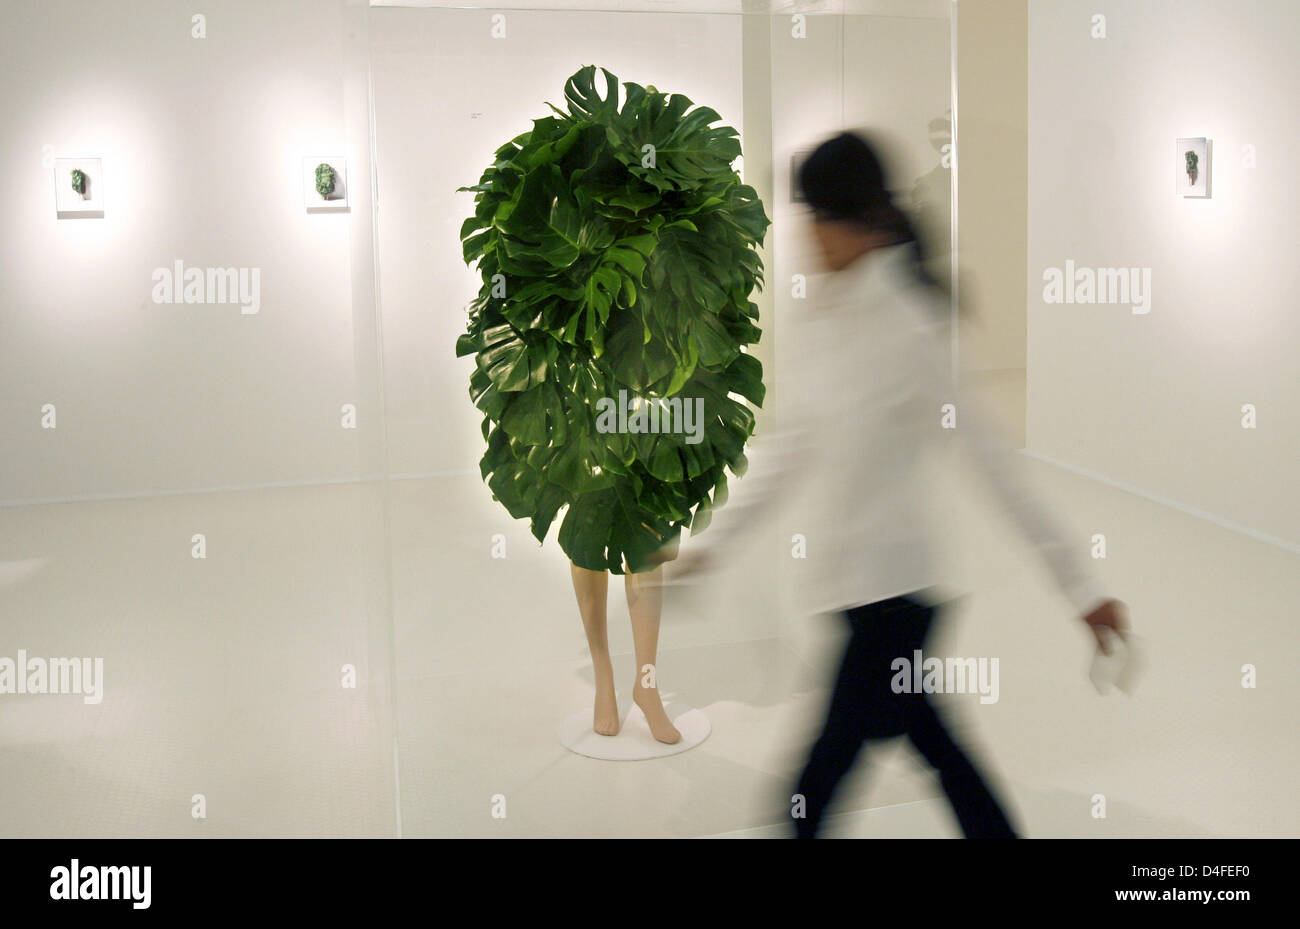 A woman passes the artwork 'Leaves Mannequin' by Japanese artist Makoto Azuma at the exhibition 'Makoto Azuma: Botanical Sculpture' at the NRW Forum in Duesseldorf, Germany, 04 July 2008. The exhibition runs from 05 July through 03 August 2008. Photo: FRANZ-PETER TSCHAUNER Stock Photo